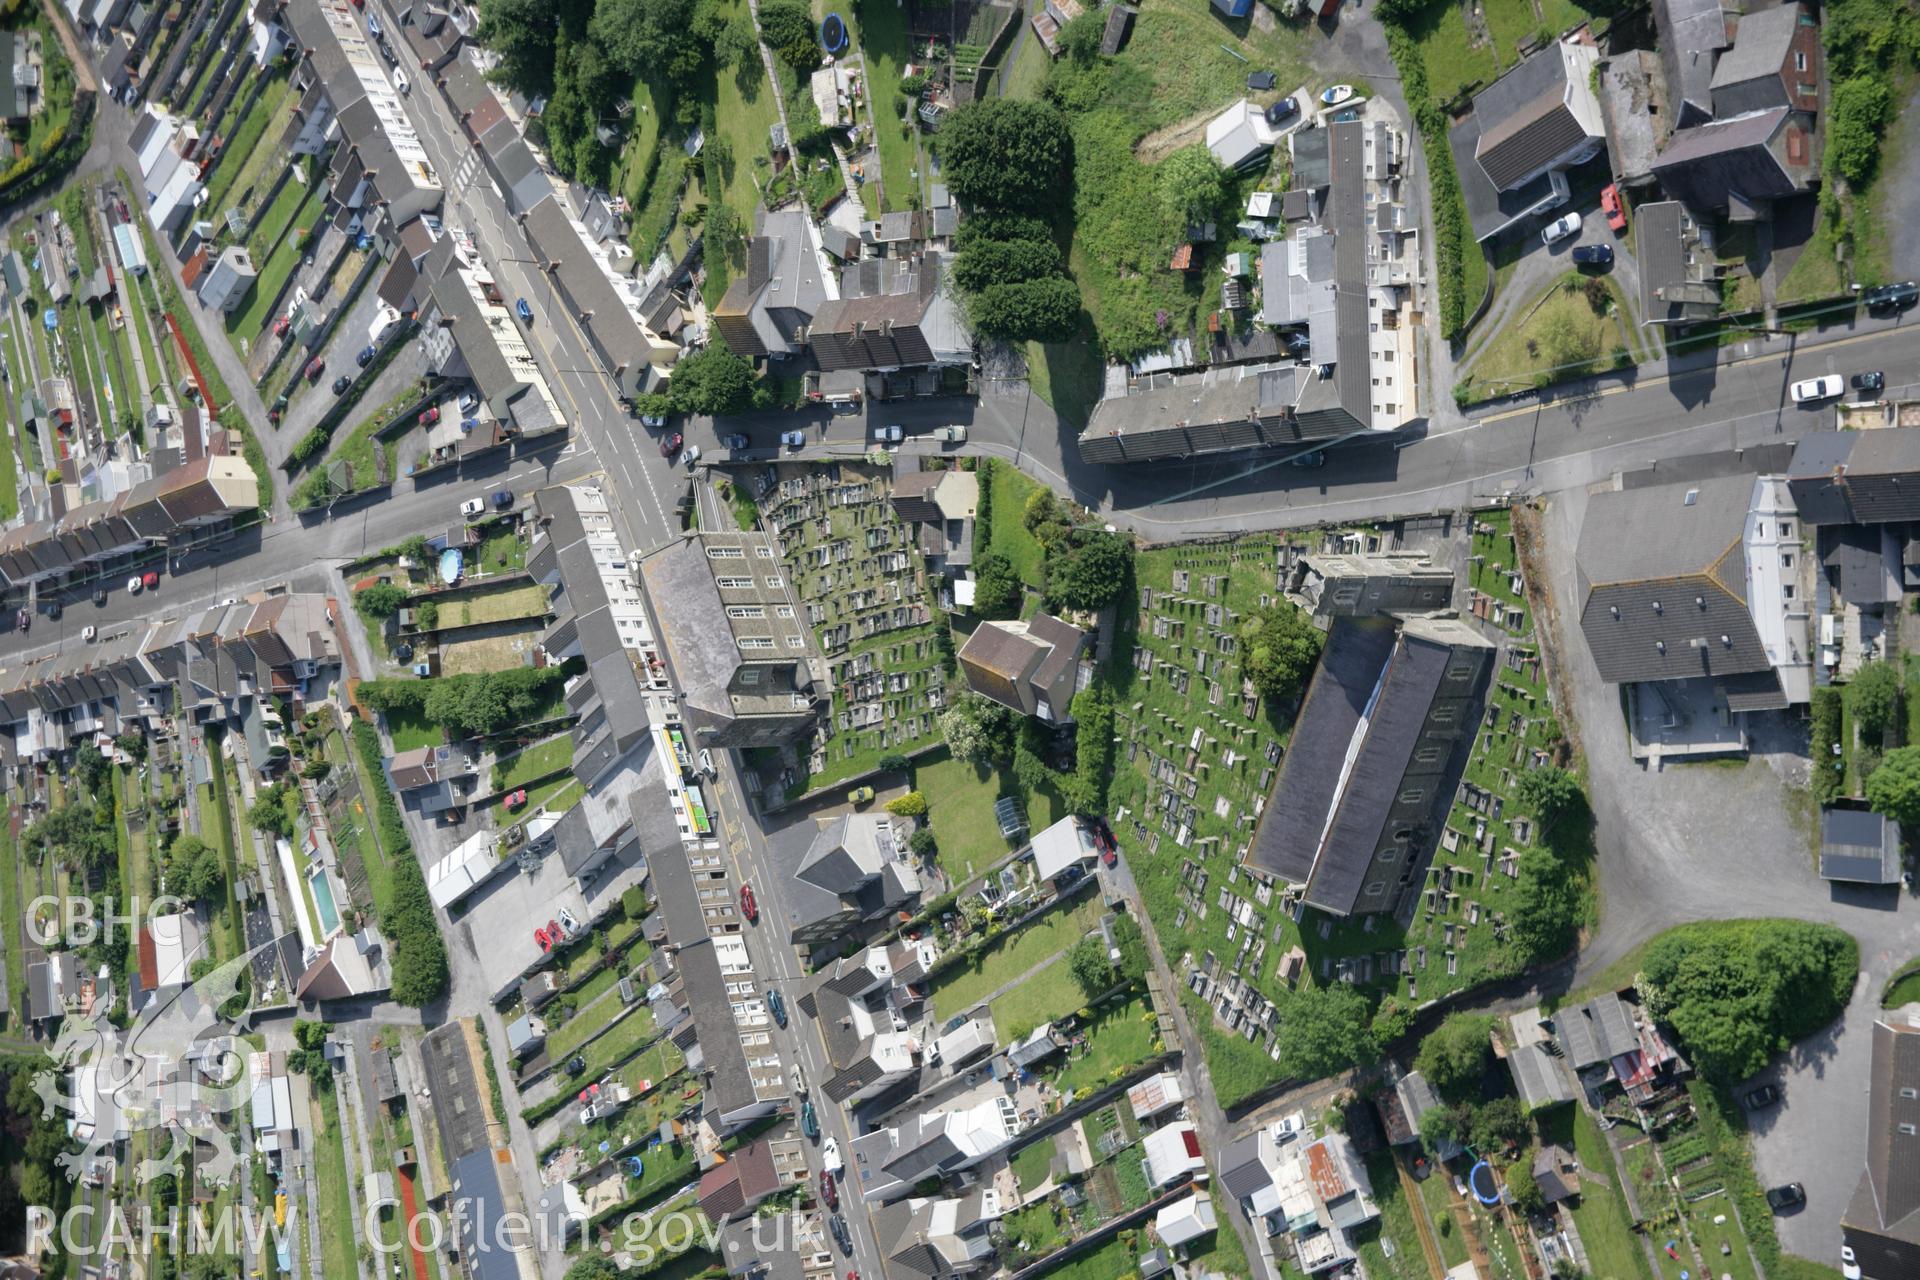 RCAHMW colour oblique aerial photograph of Llangennech in general view of the town from the north, with St Cennech's Church. Taken on 09 June 2005 by Toby Driver